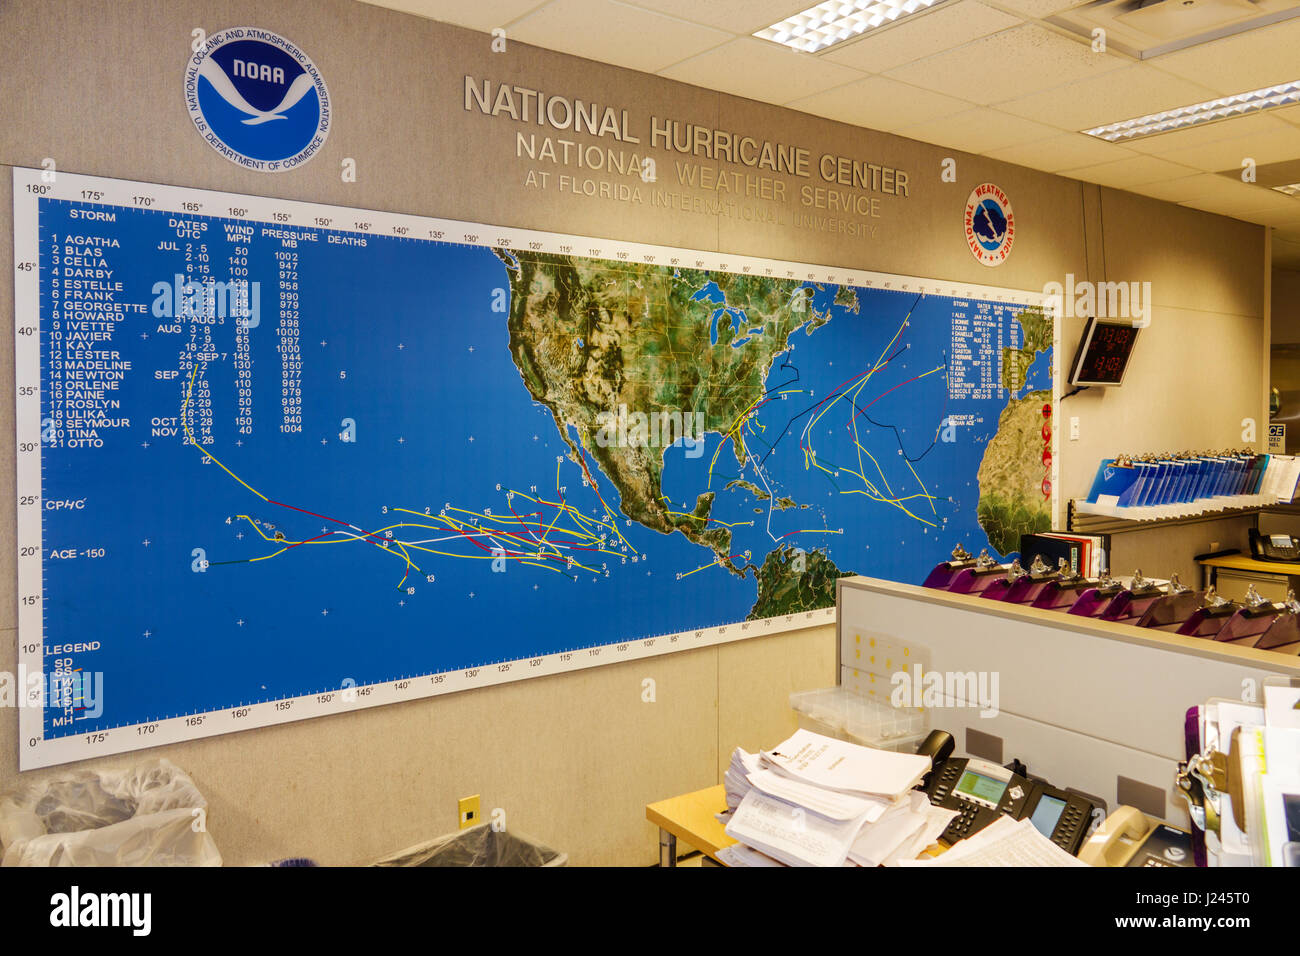 Miami Florida,National Hurricane Center,NHC,NOAA,National Weather Service,open house,interior Inside,map,Pacific,Atlantic,named storms,tracking,FL1703 Foto Stock